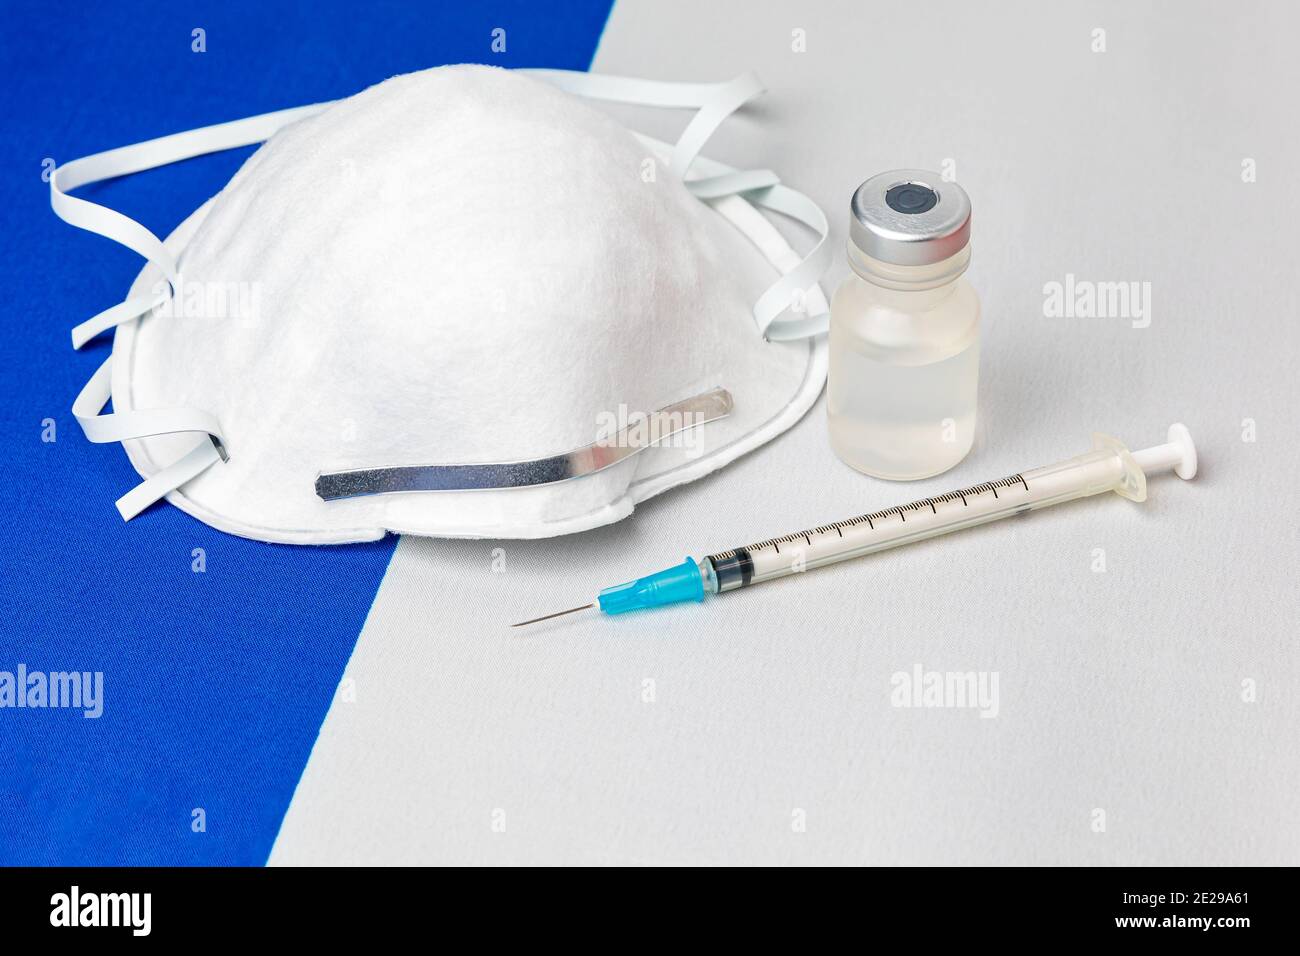 France flag, n95 face mask, needle syringe and vial. Concept of Covid-19 coronavirus vaccine distribution, supply shortage and healthcare crisis Stock Photo